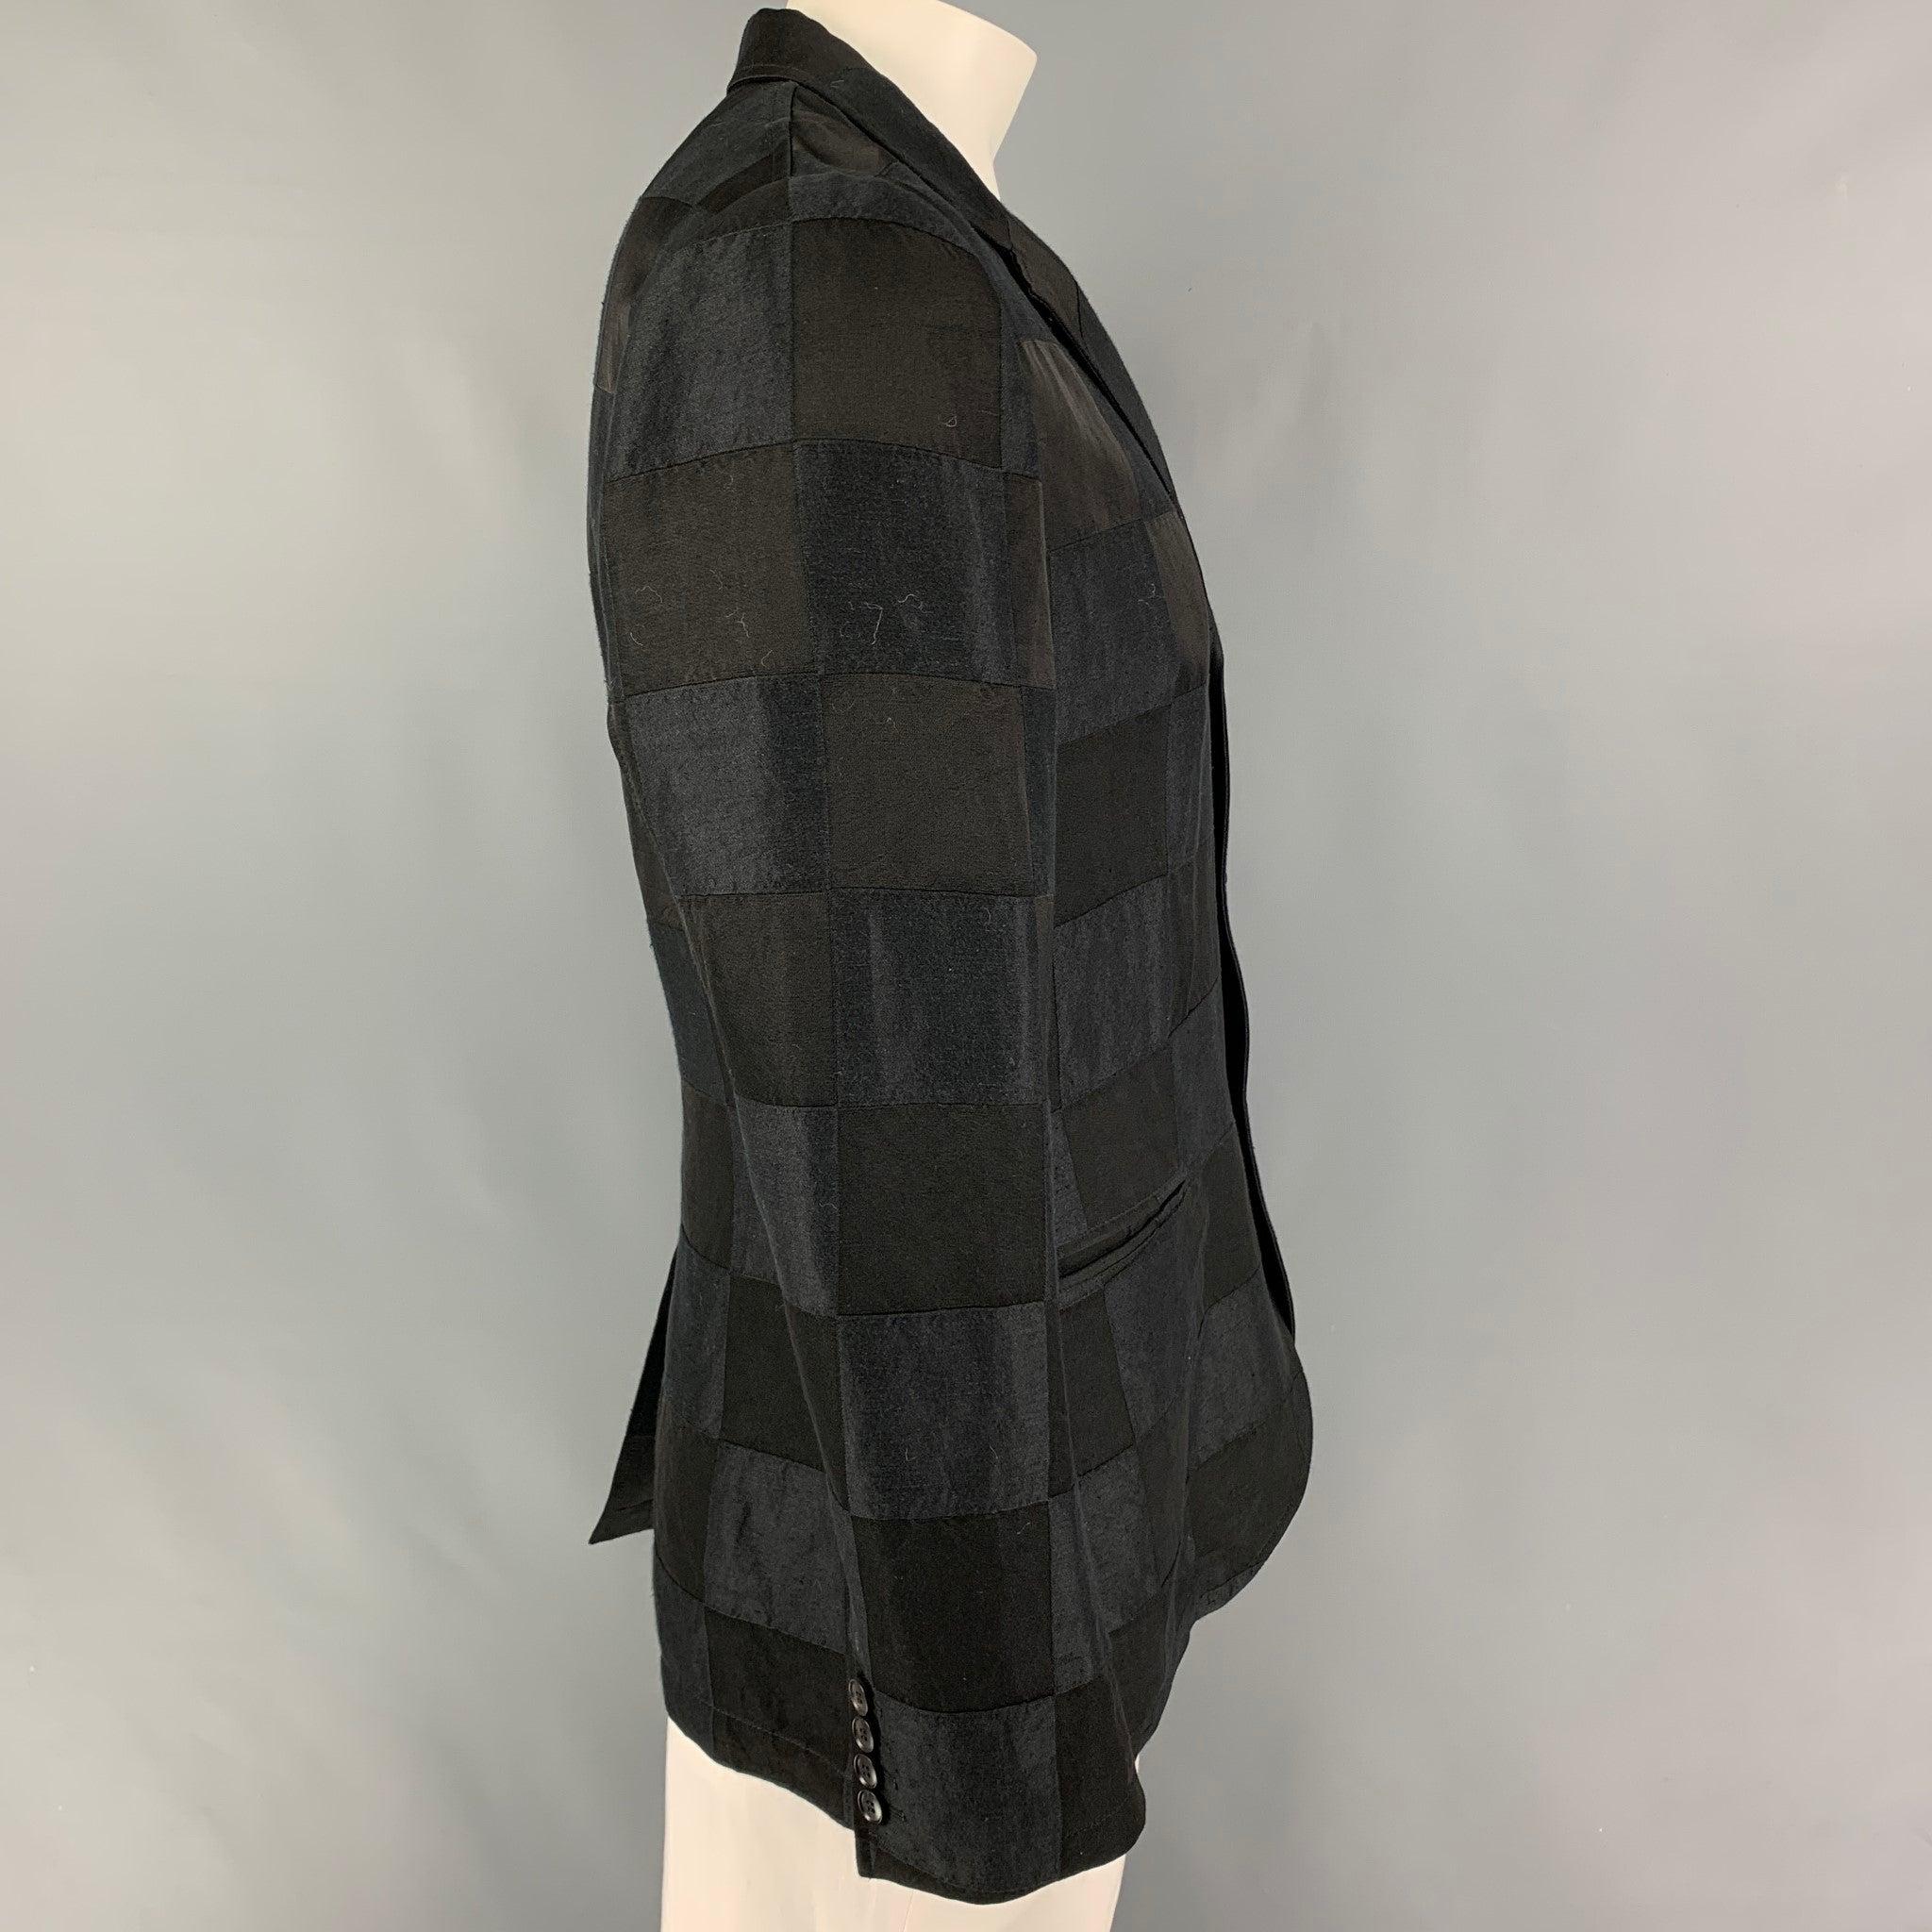 JOHN VARVATOS sport coat comes in a black & charcoal checkered material featuring a notch lapel, slit pockets, single back vent, and a three button closure. Made in Italy.
Very Good
Pre-Owned Condition.
Fabric tag removed.  

Marked:   52